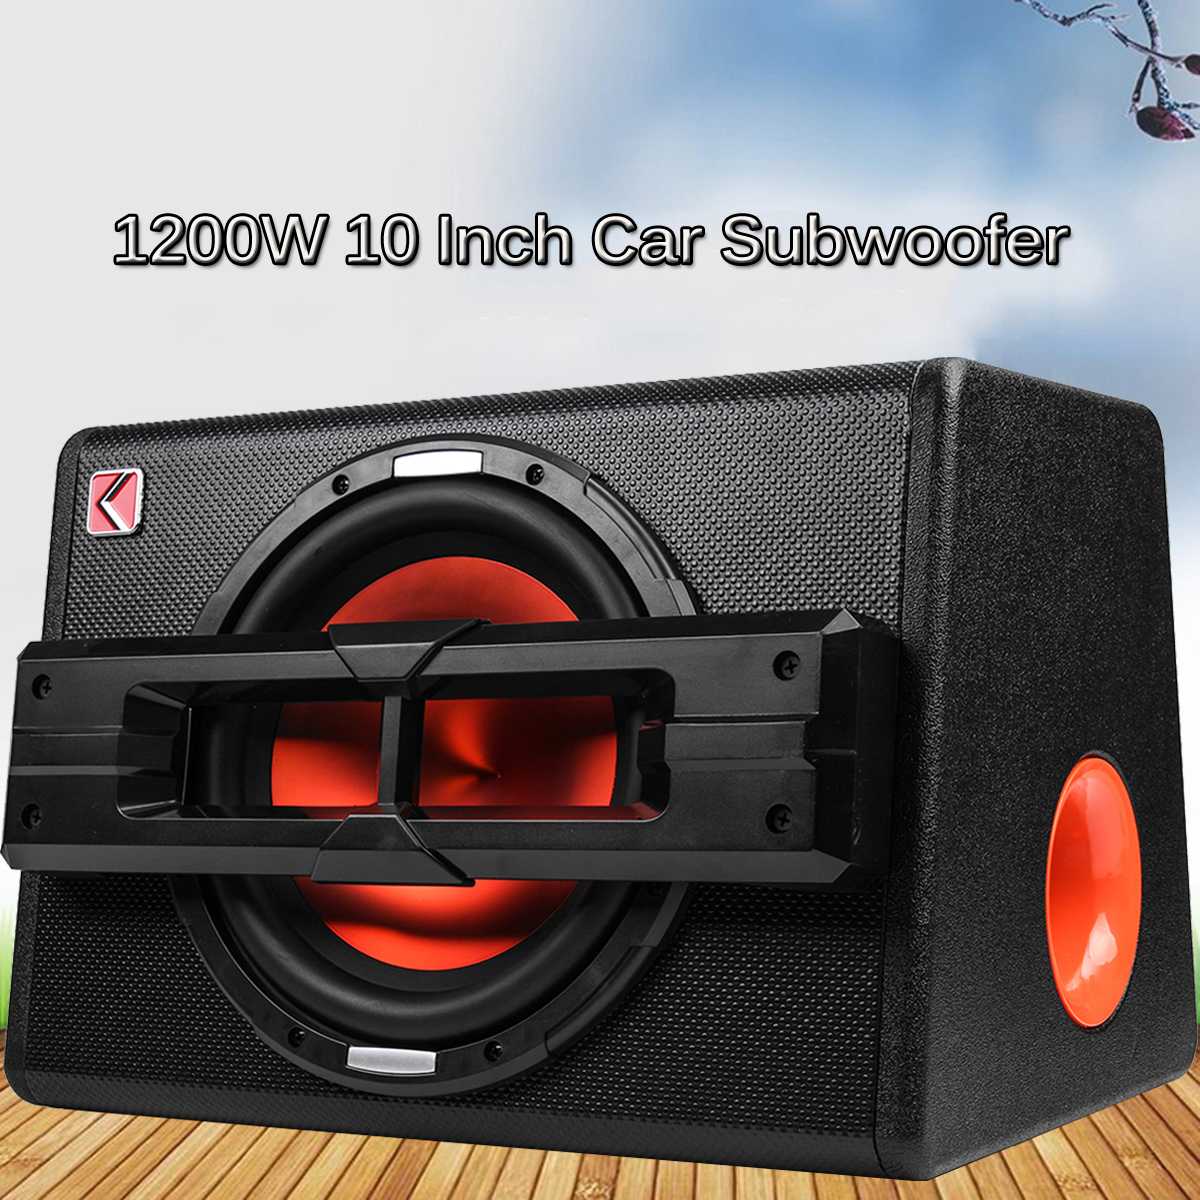 Car subwoofers for Car Subwoofers,